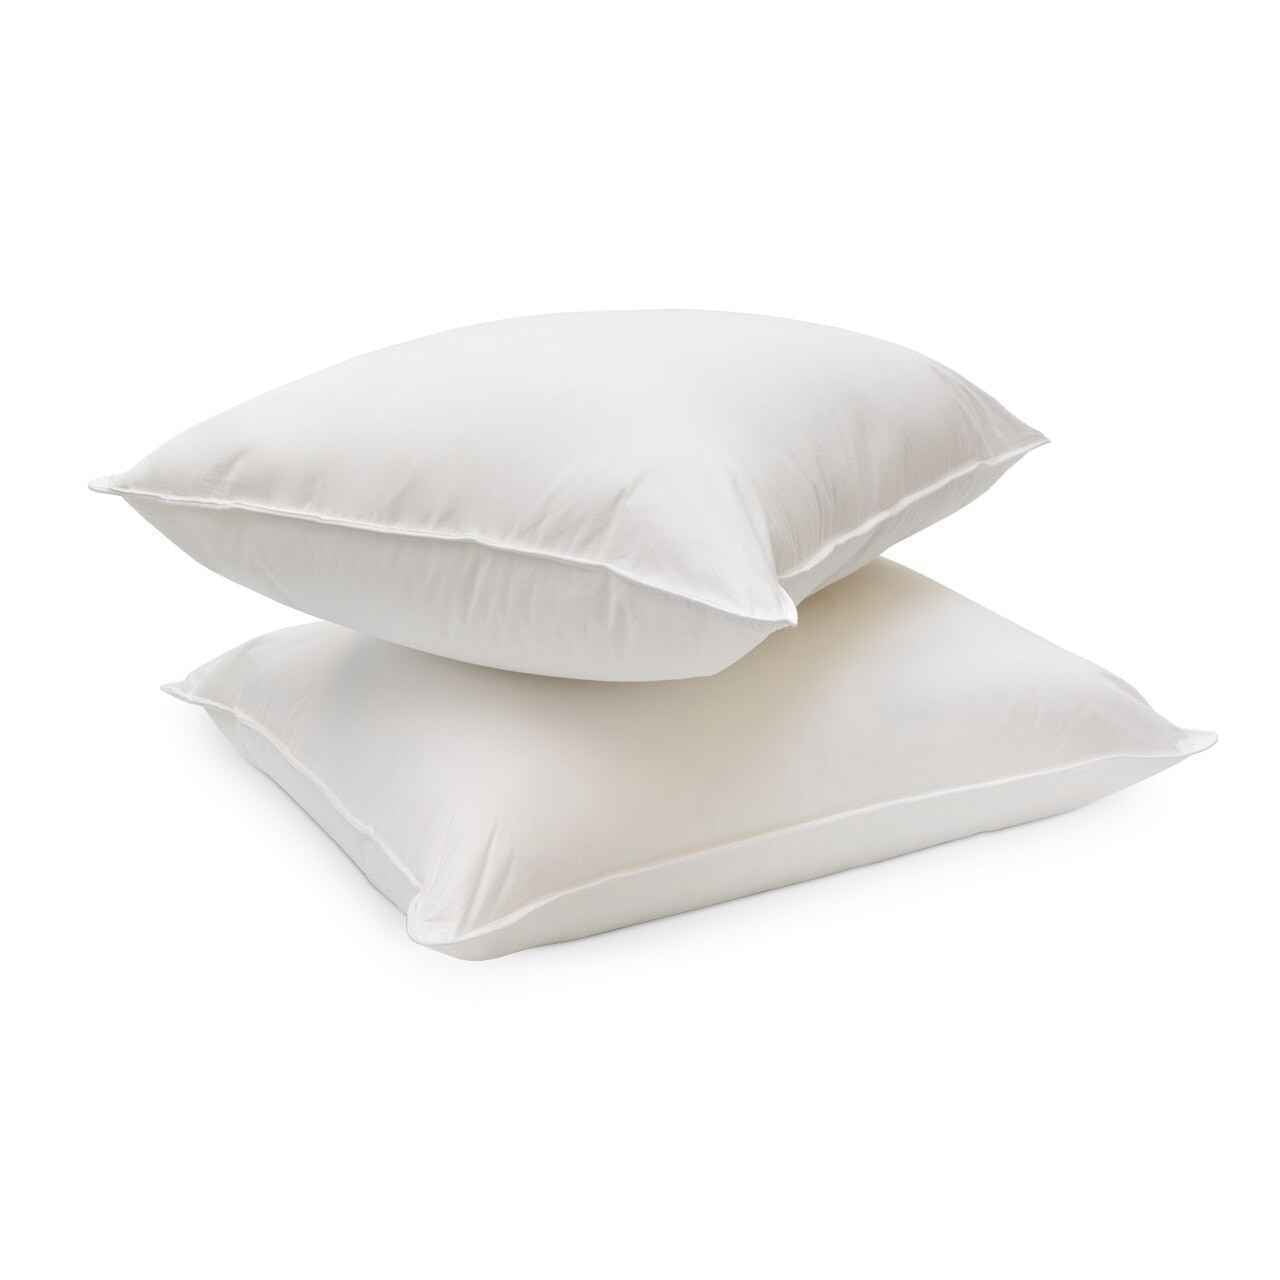 Hypoallergenic Down-Alternative Super Soft Bed Pillows 4-Pack 